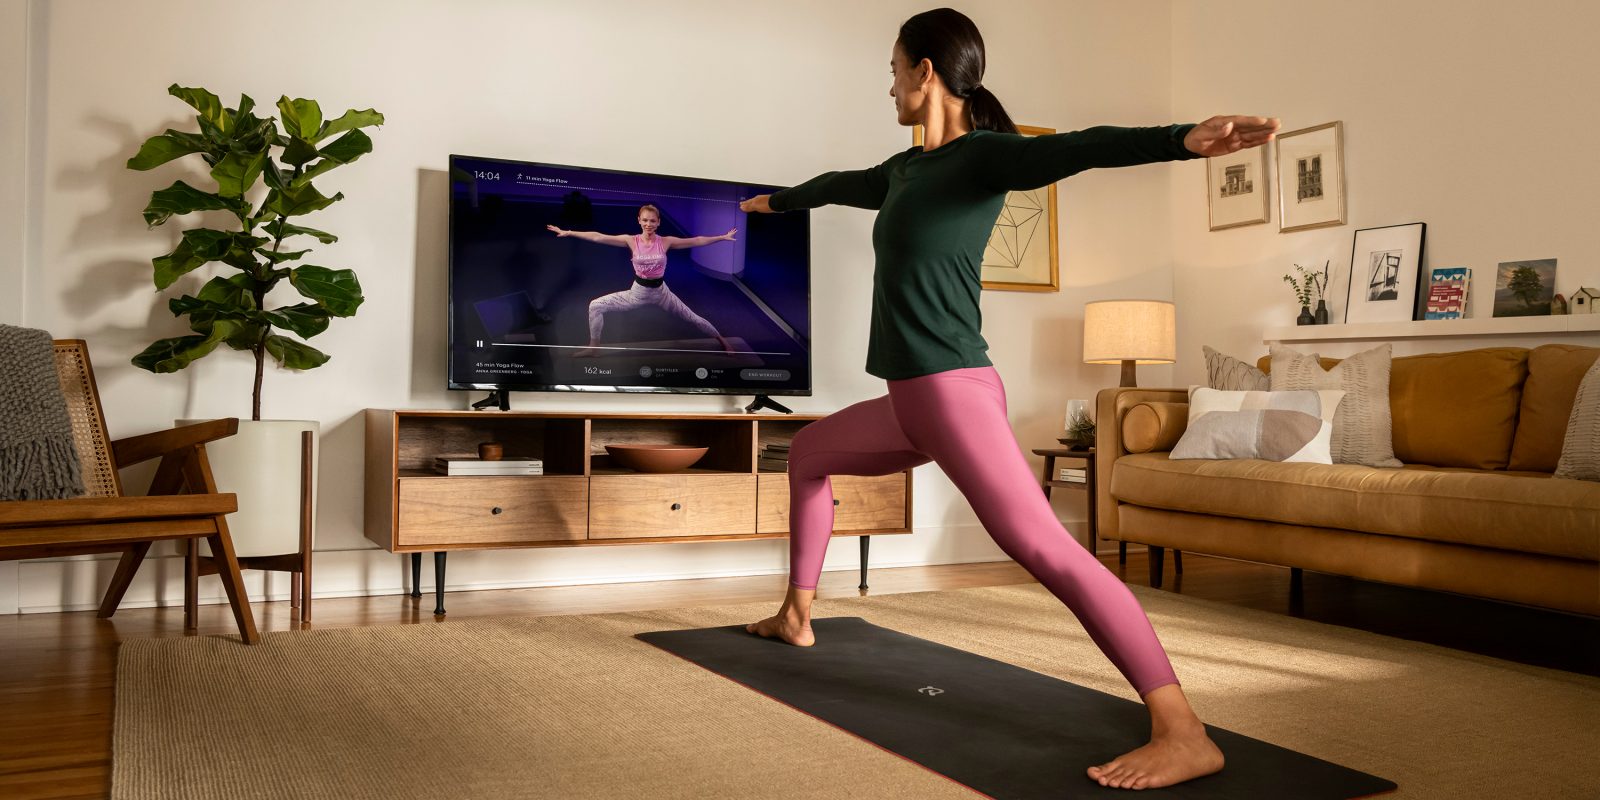 Peloton app is now available on Android TV - 9to5Google